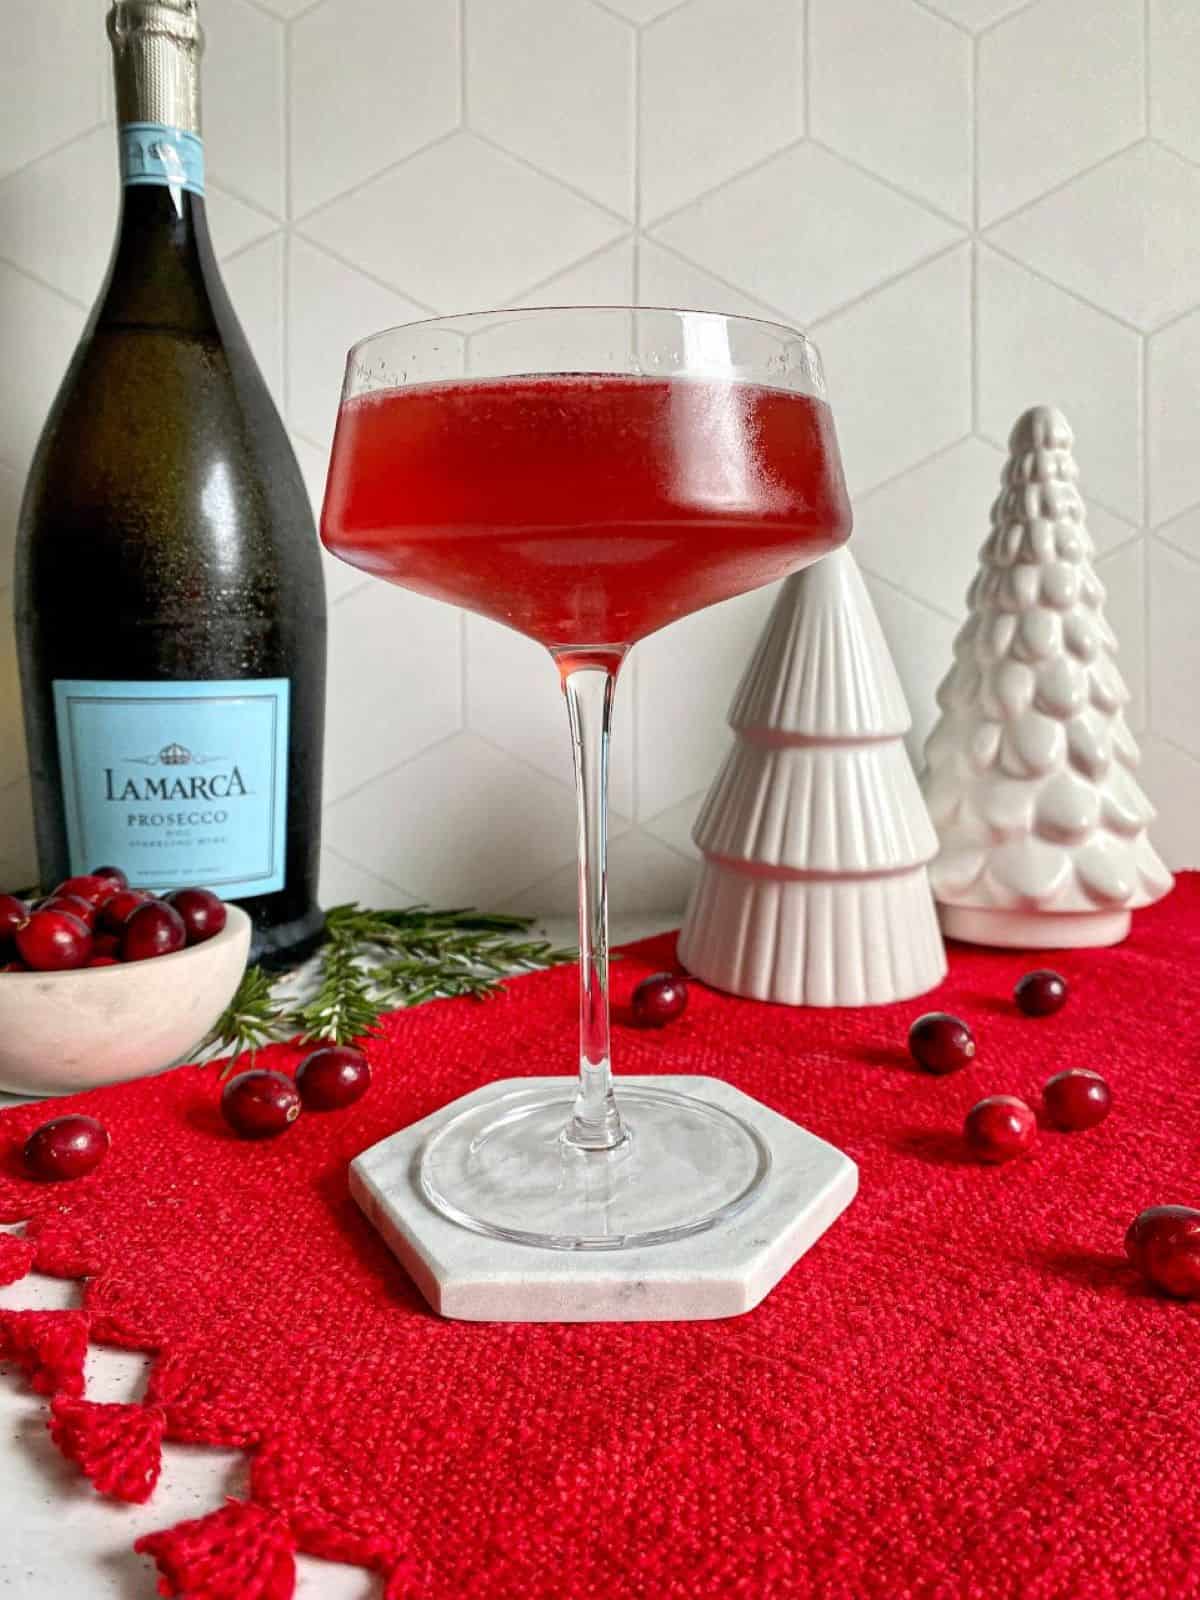 Red cocktail in a coupe glass on top of a red placemat. A bottle of prosecco is in the background.